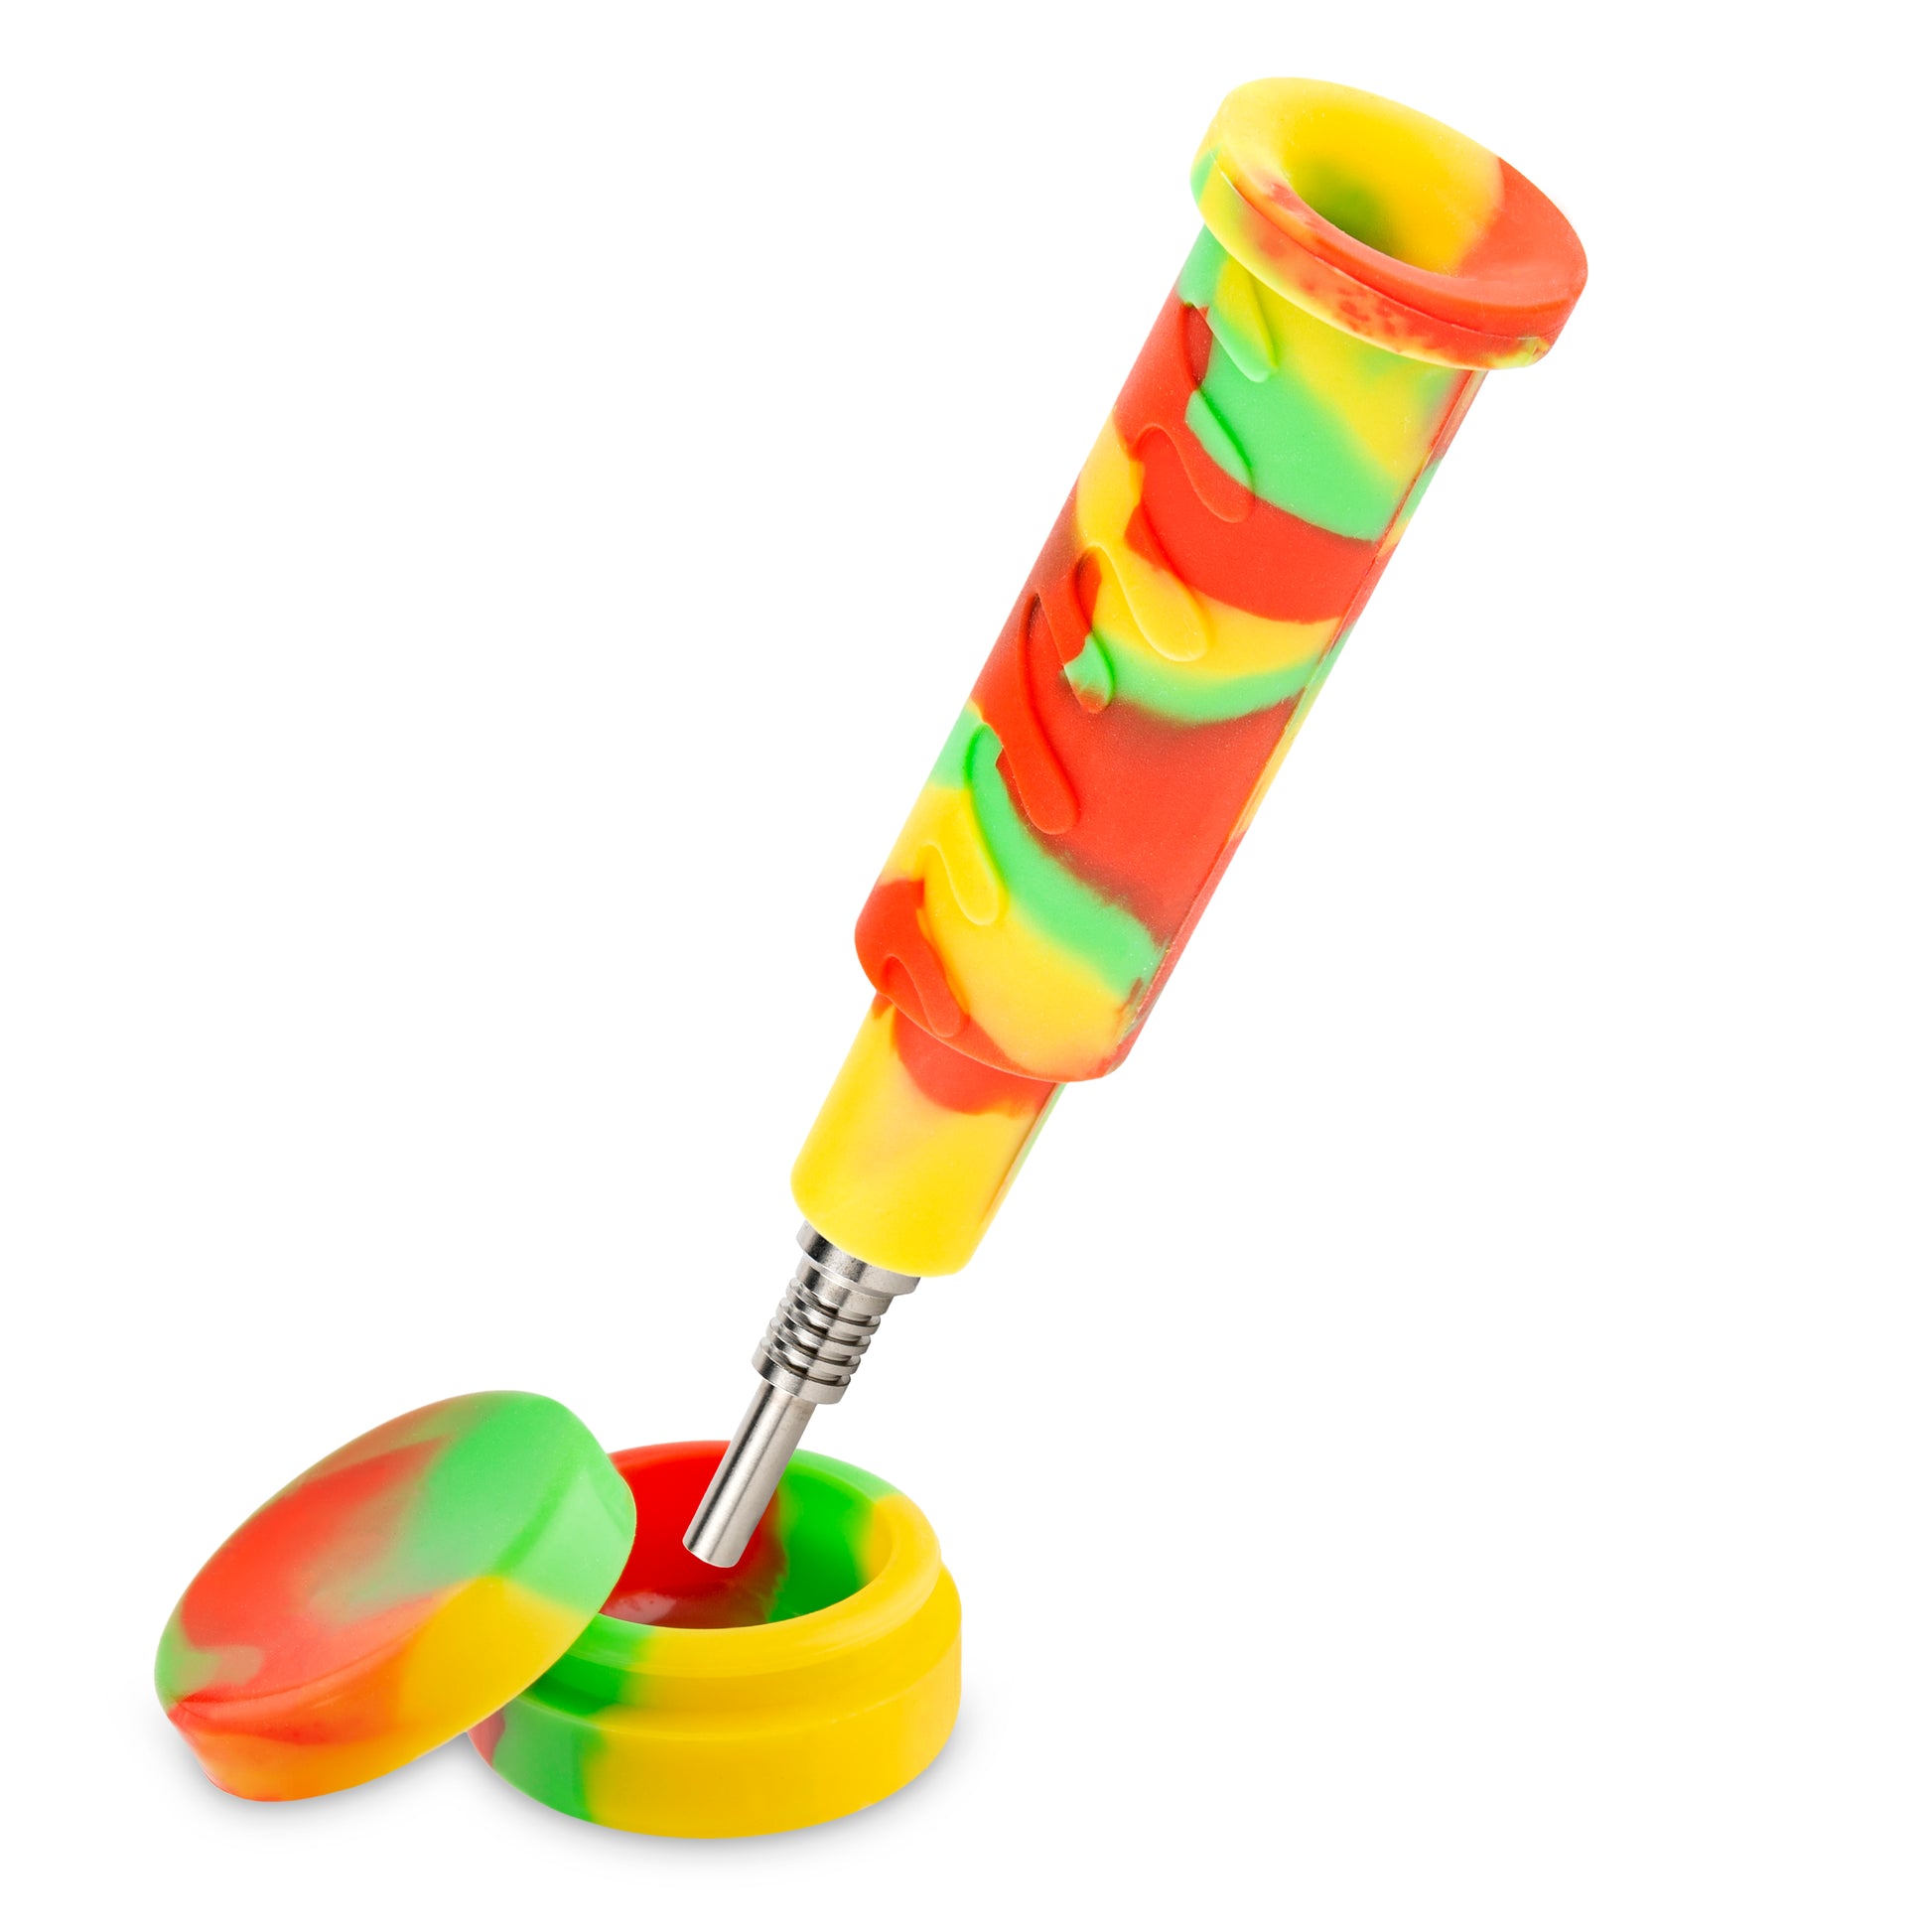 Ooze®, 4-in-1 UFO Hybrid Silicone Nectar Collector & Water Pipe